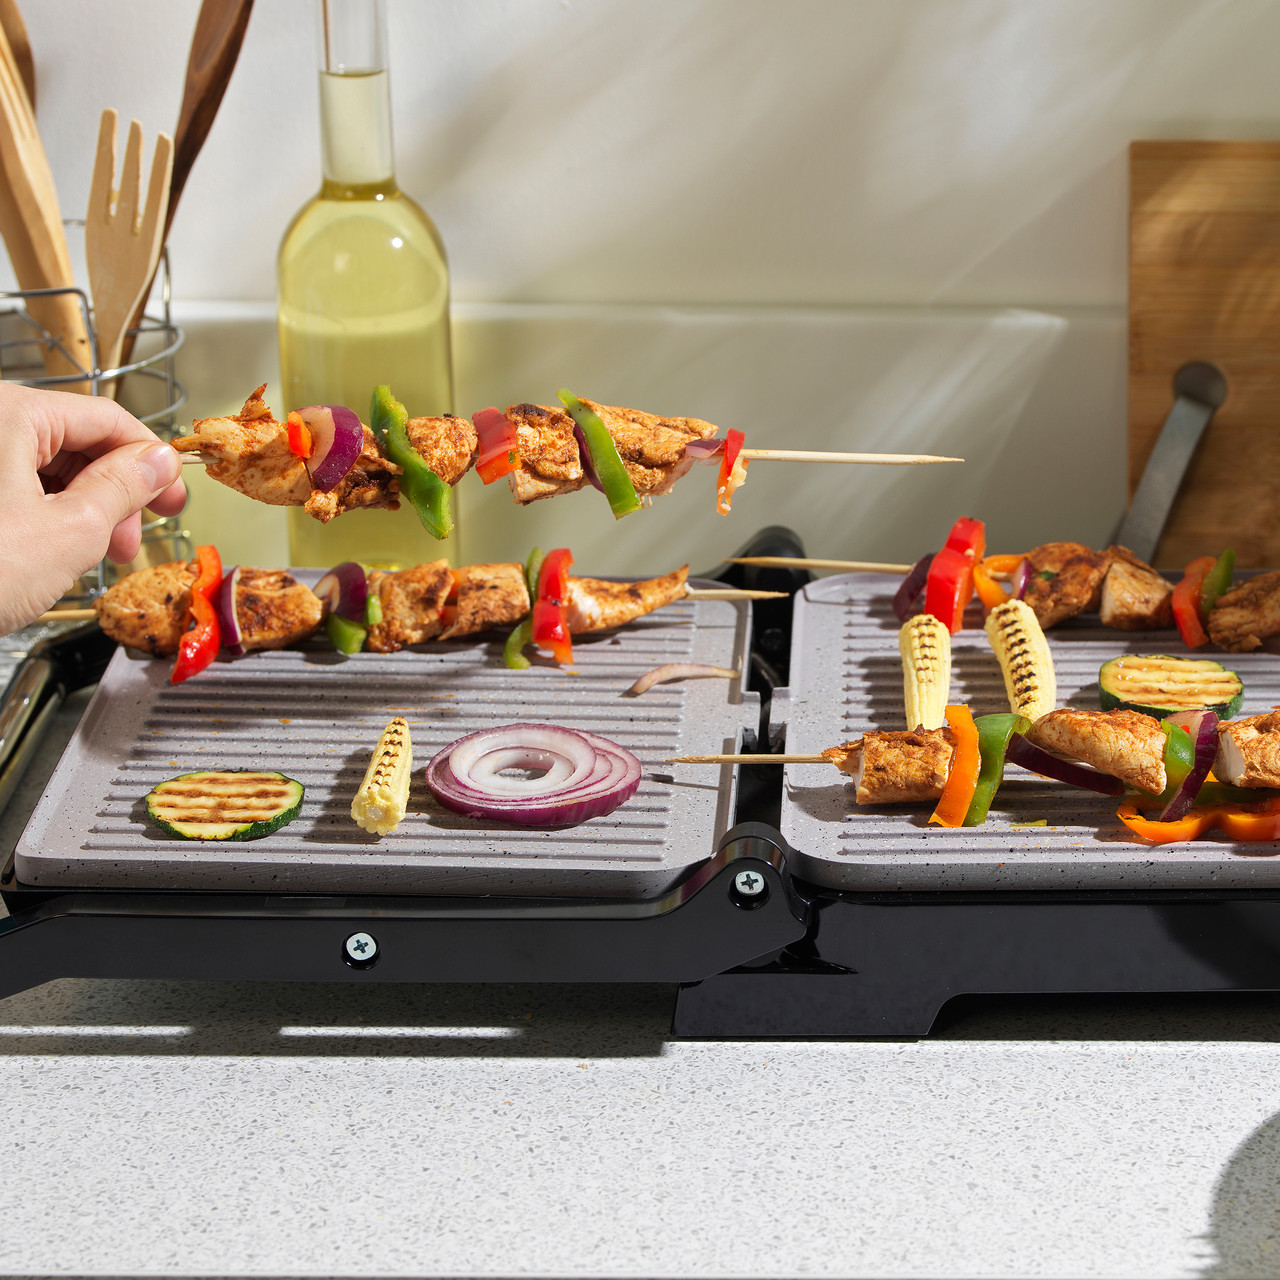 https://cdn11.bigcommerce.com/s-5vfc75n1yv/images/stencil/1280x1280/products/115/18317/xl-health-grill-and-panini-maker-marble-effect-non-stick-coating-salter-ek4076-5054061336436__66021.1698133985.jpg?c=1